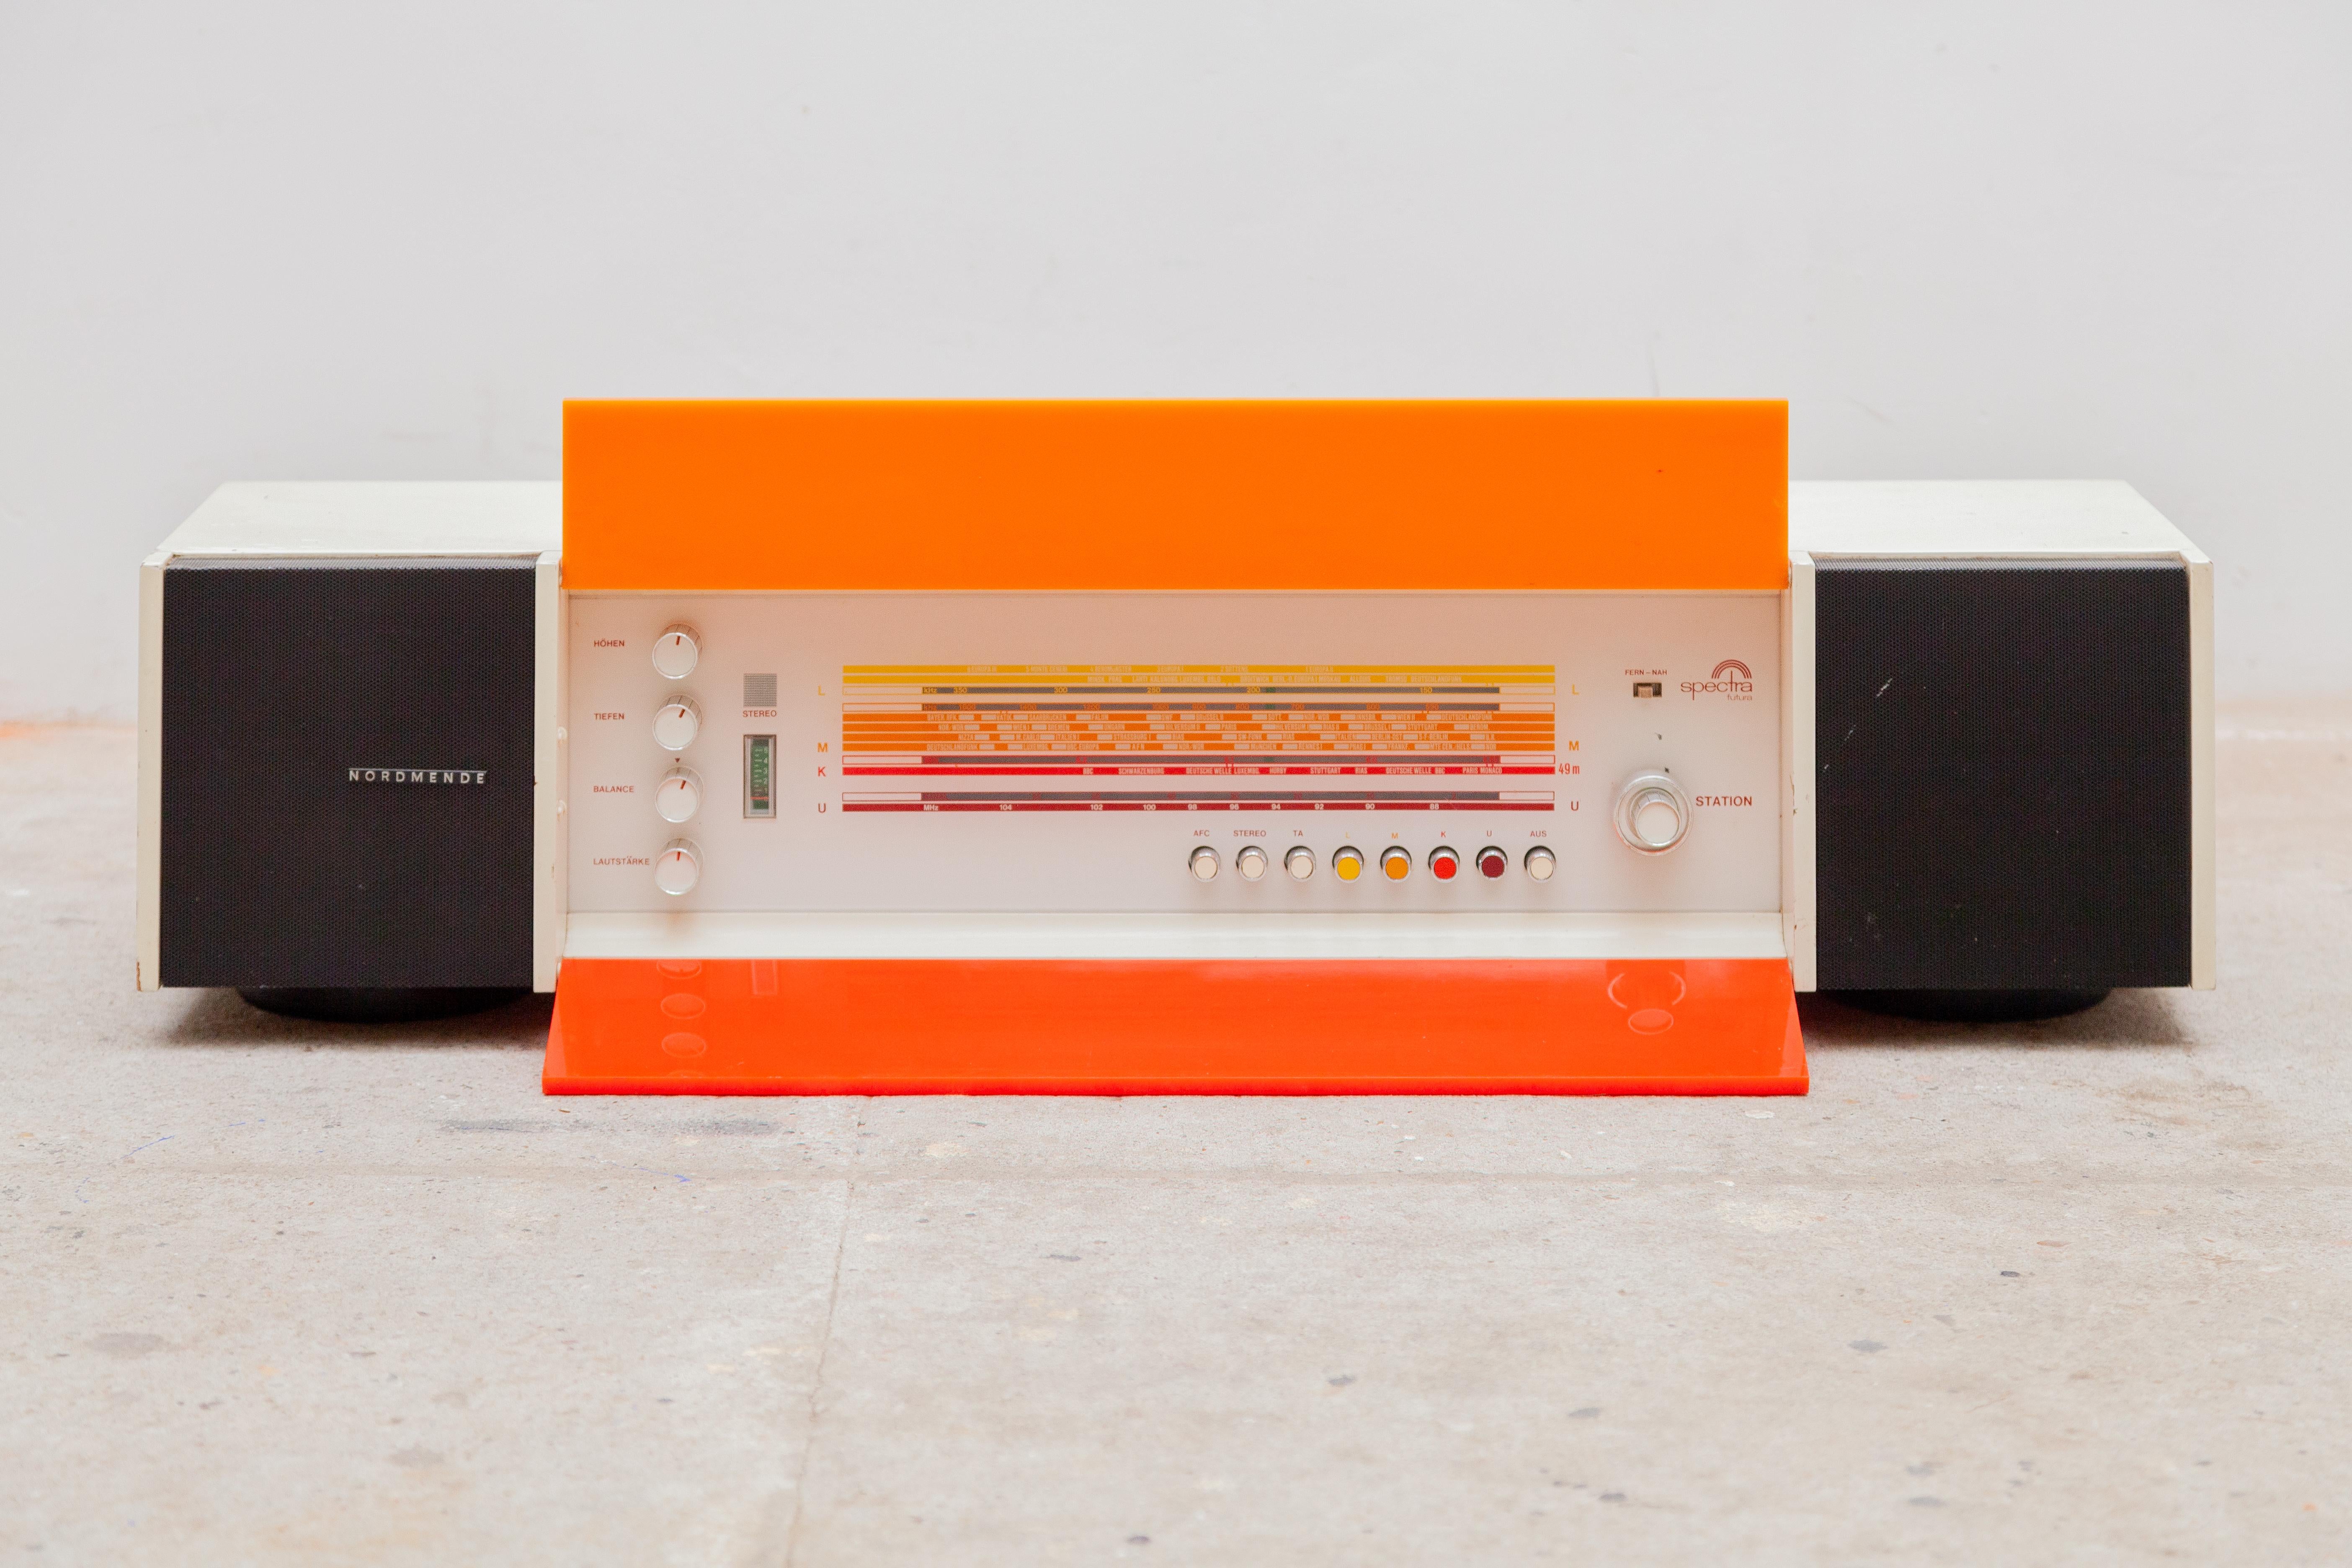 Original Pop Art Radio in good condition designed by the industrial designer Raymond Loewy.Radio with a plexi front, characteristic of Loewy in the colors red and orange, also recurring in his designed furniture.The plexi plates can be opened to